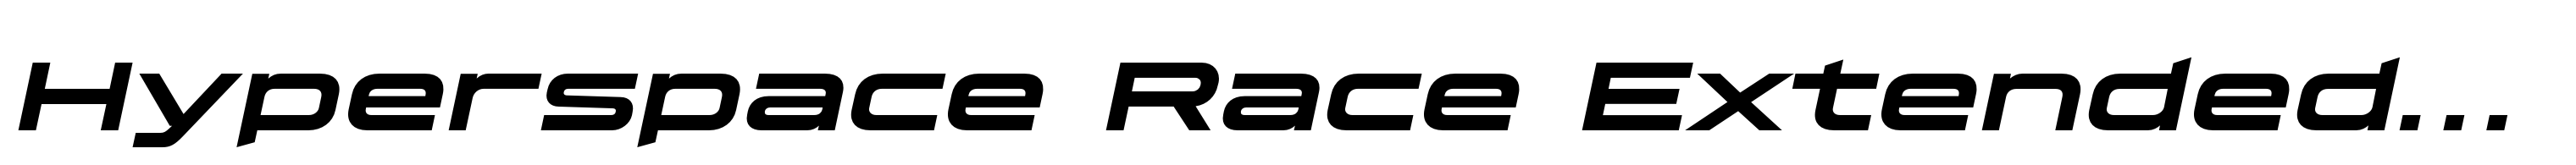 Hyperspace Race Extended Bold Italic